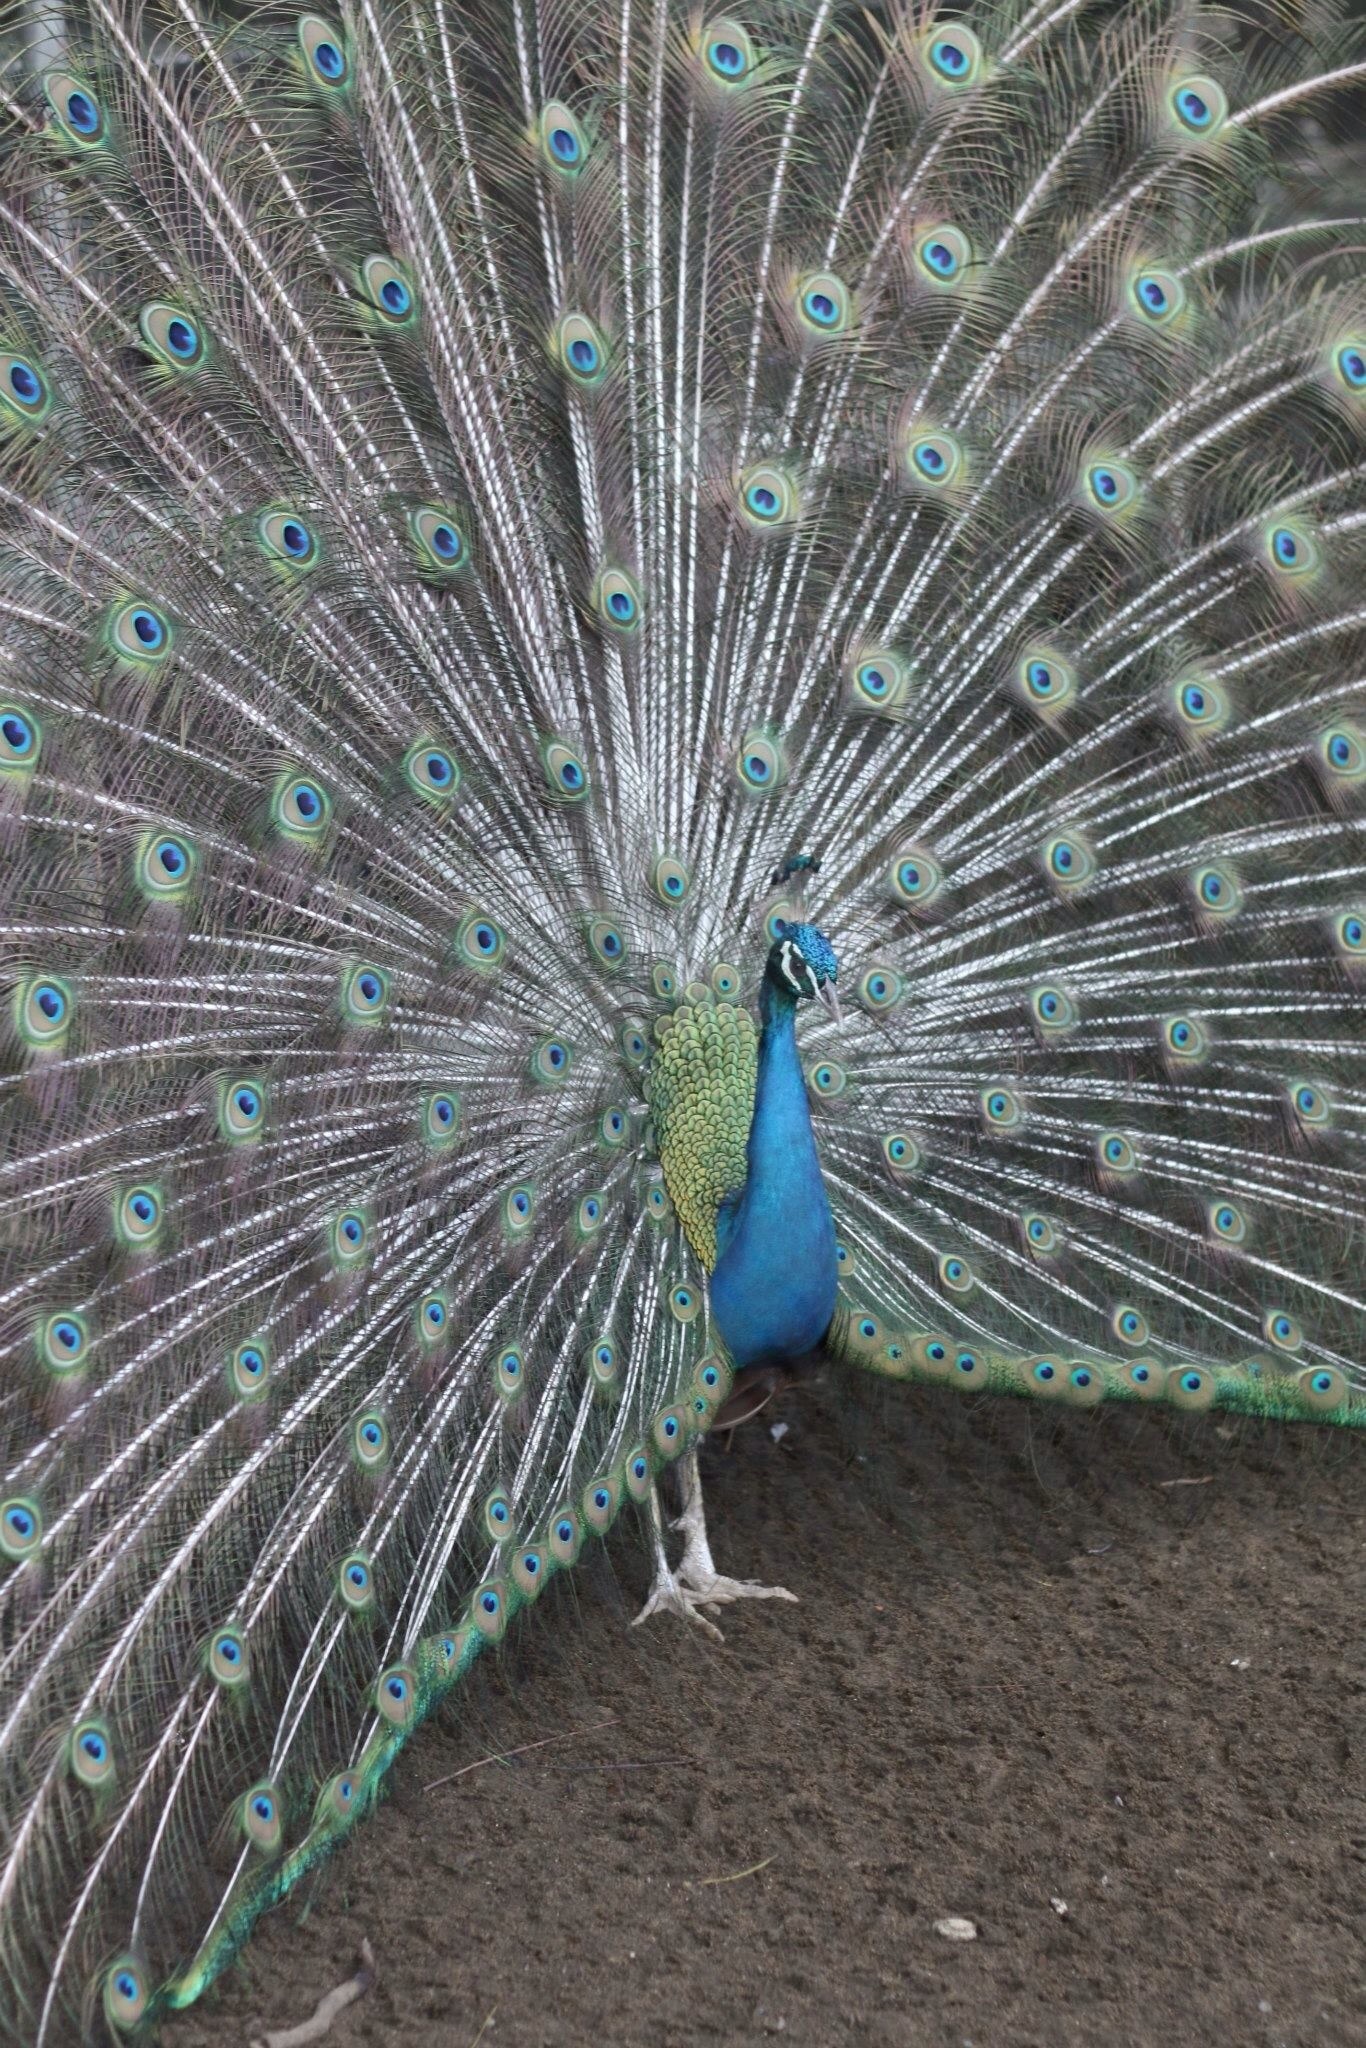 I spotted this peacock showing off in Baker's Hill, Palawan. Such a beautiful creature!